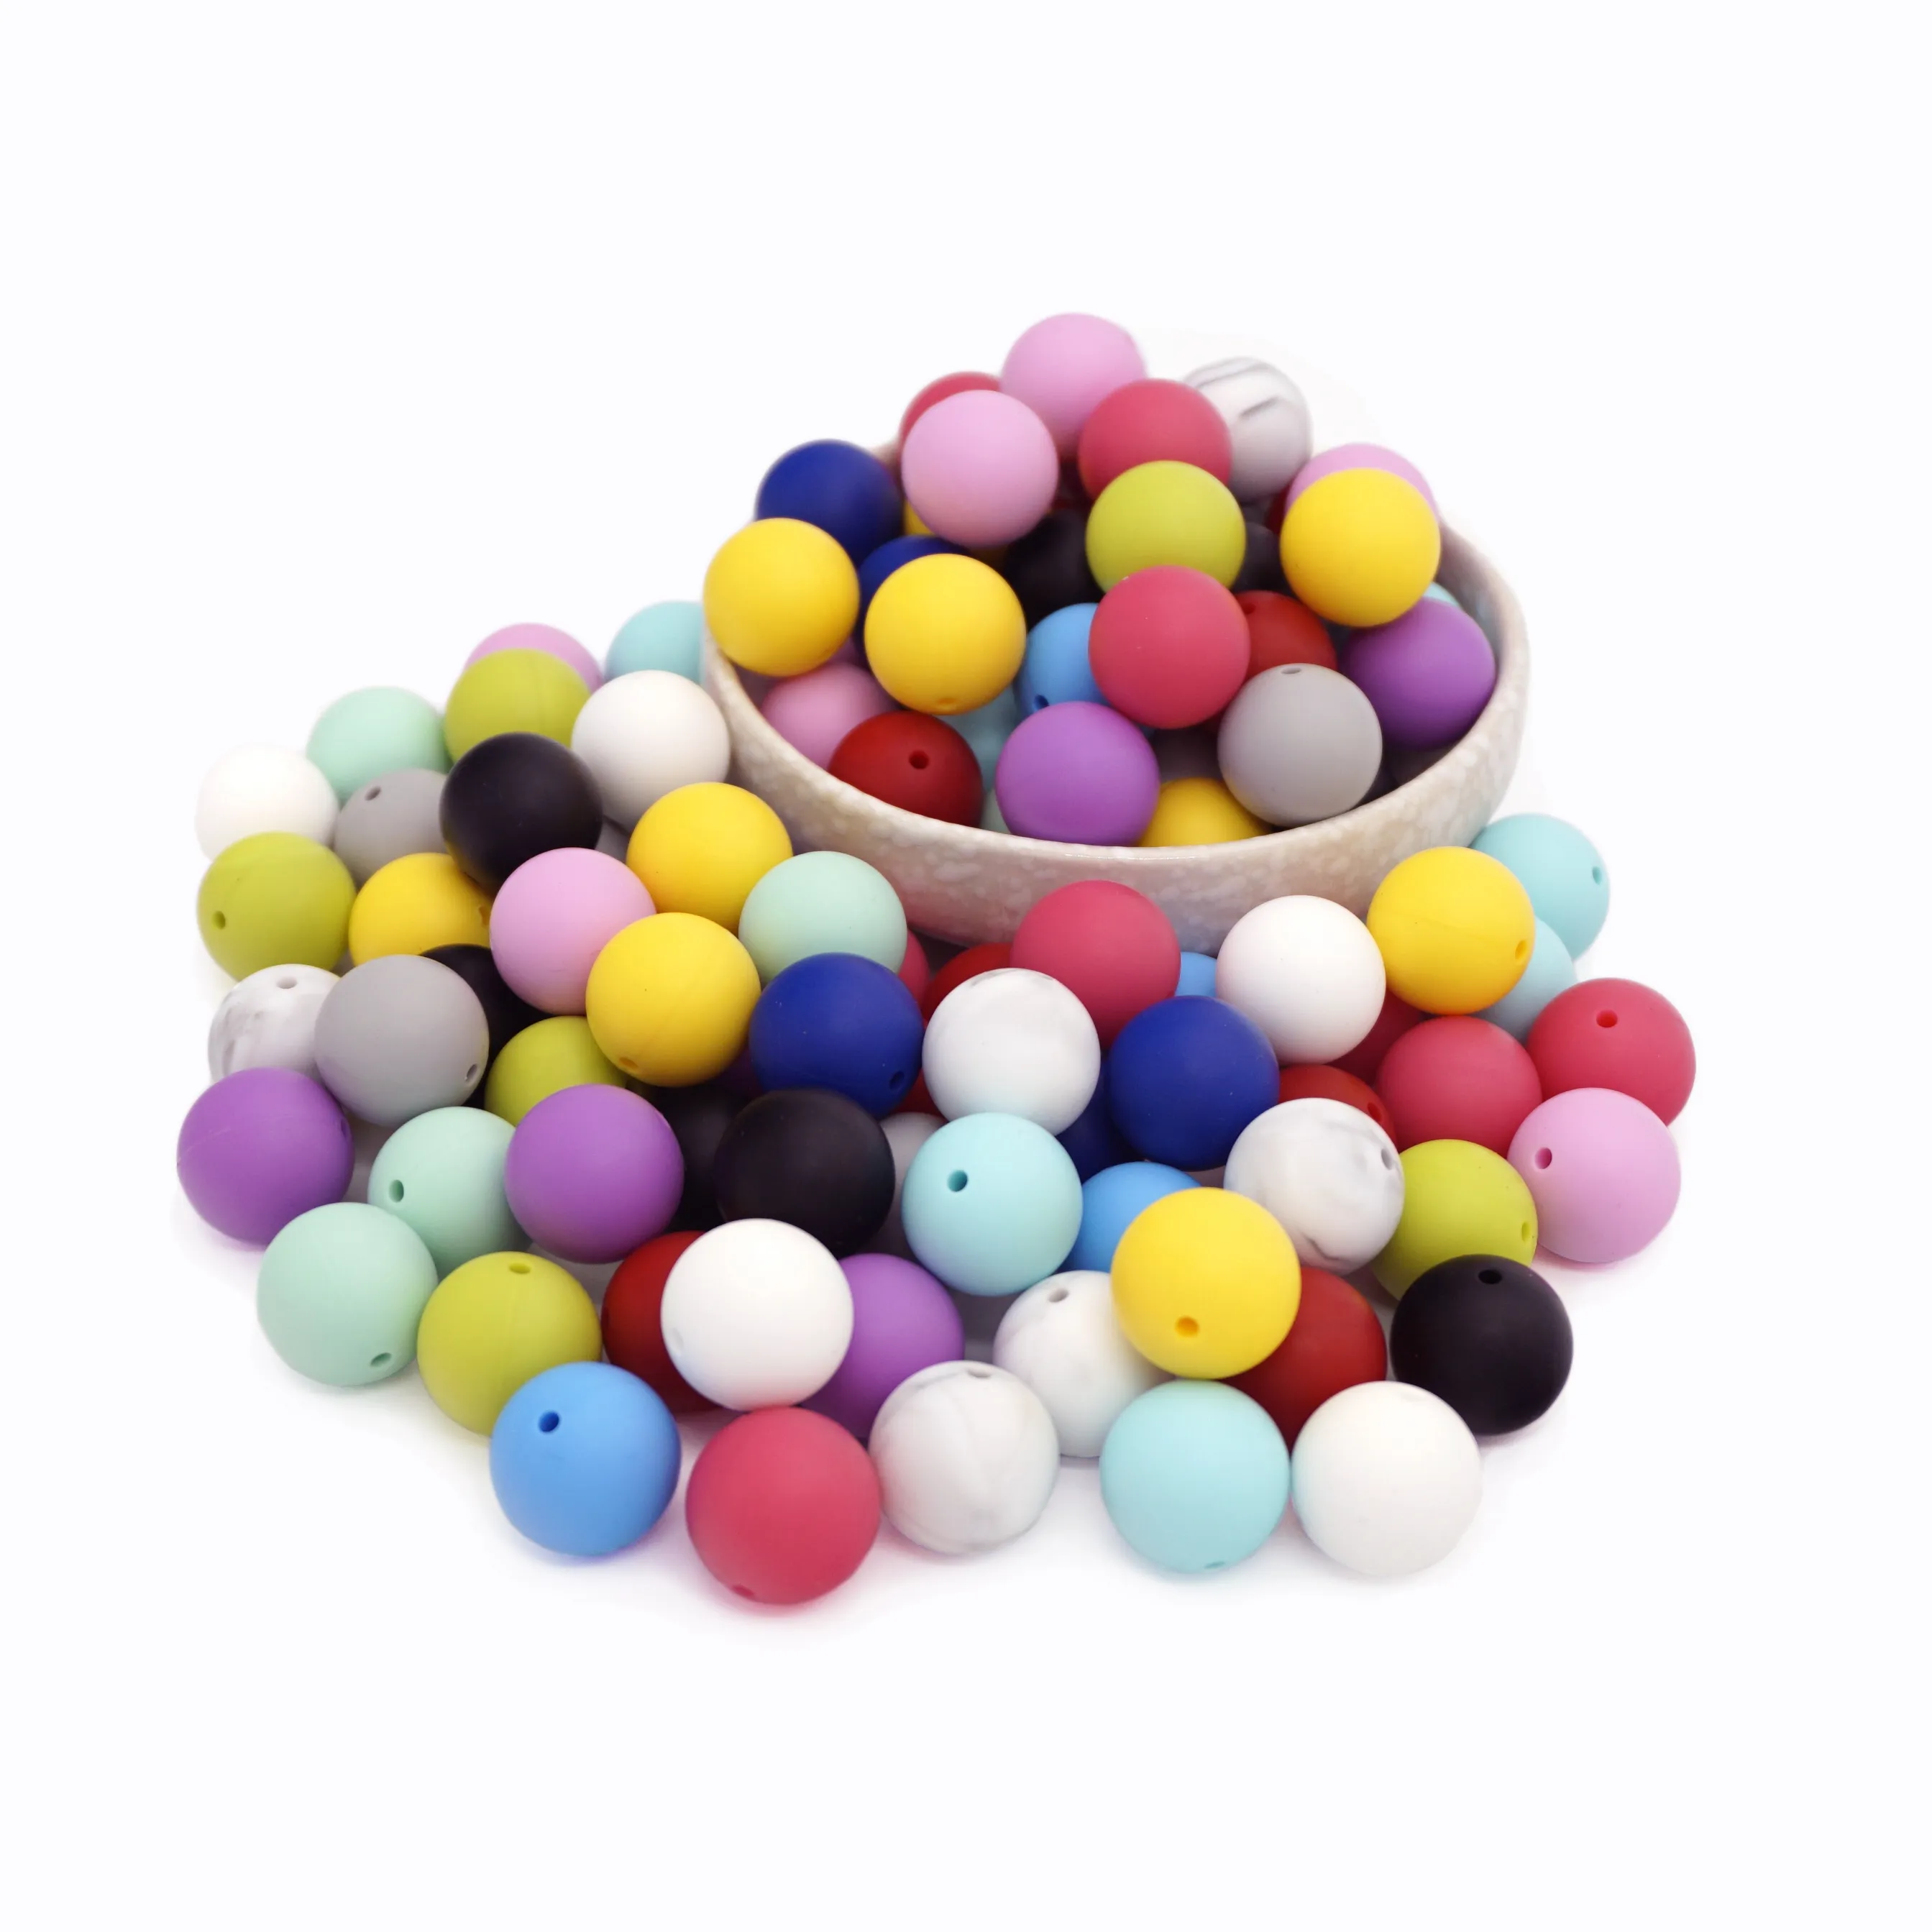 Wholesale Food Grade Round Silicone Baby Teething Beads Loose Soft Chew Silicone Beads DIY Necklace Accessory for Jewelry